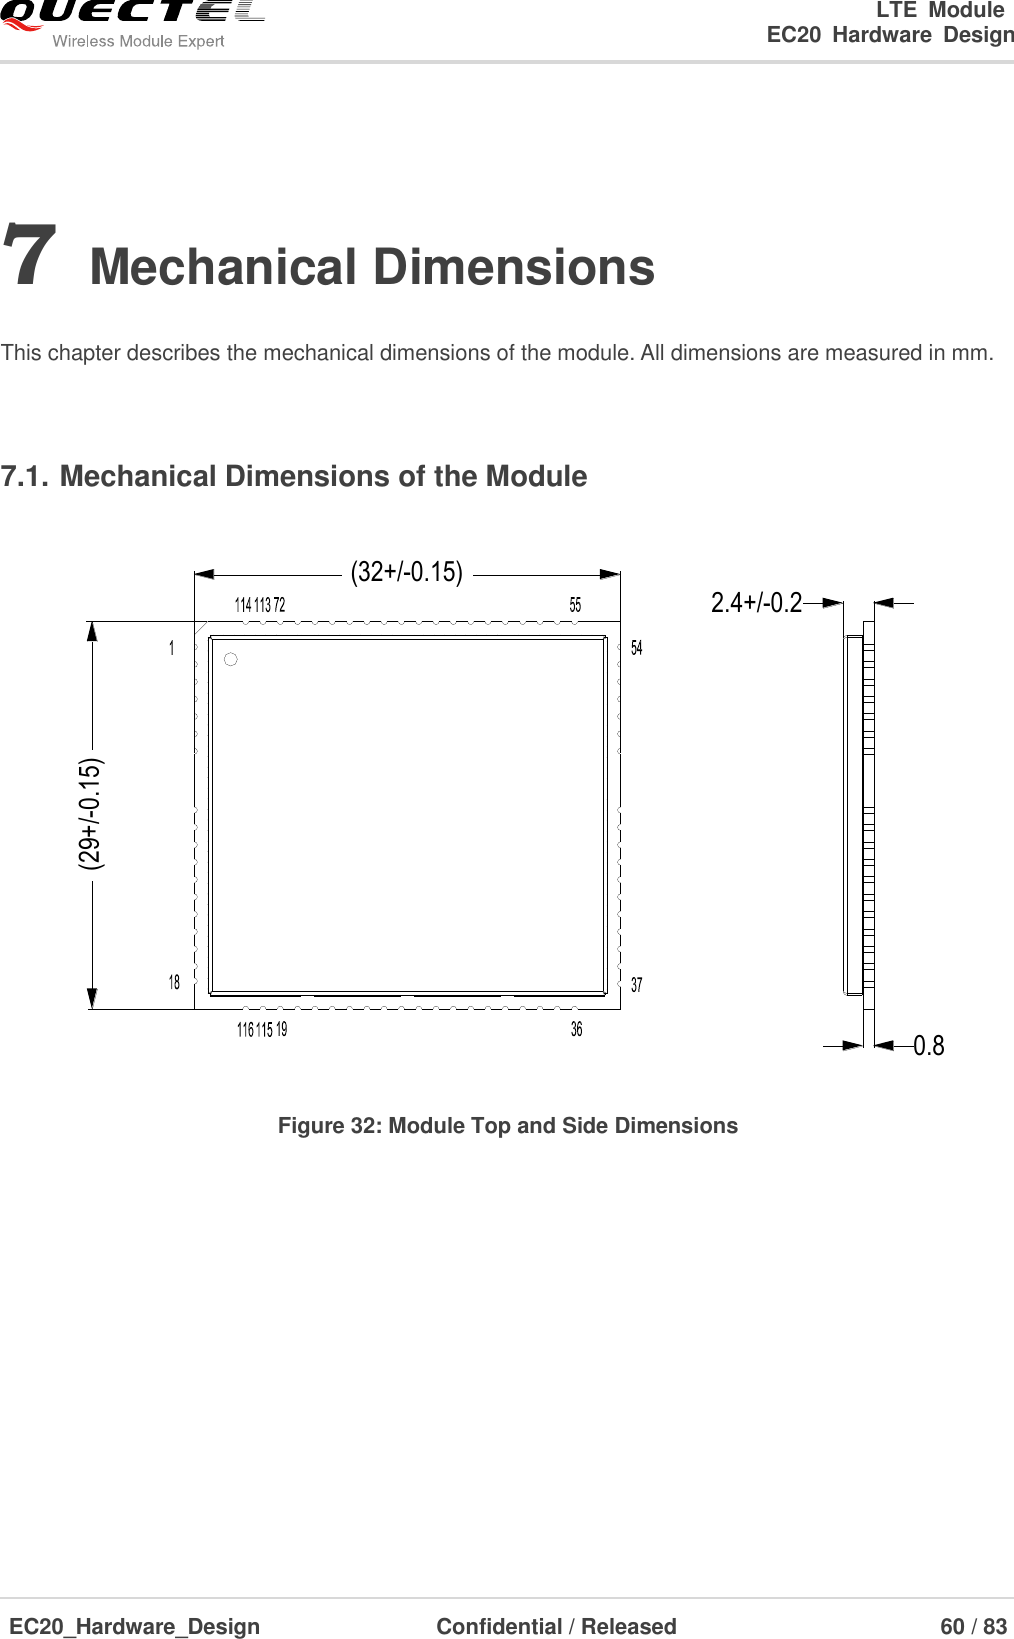                                                                        LTE  Module                                                                   EC20  Hardware  Design  EC20_Hardware_Design                  Confidential / Released                            60 / 83     7 Mechanical Dimensions  This chapter describes the mechanical dimensions of the module. All dimensions are measured in mm.  7.1. Mechanical Dimensions of the Module (32+/-0.15)(29+/-0.15)0.82.4+/-0.2 Figure 32: Module Top and Side Dimensions  